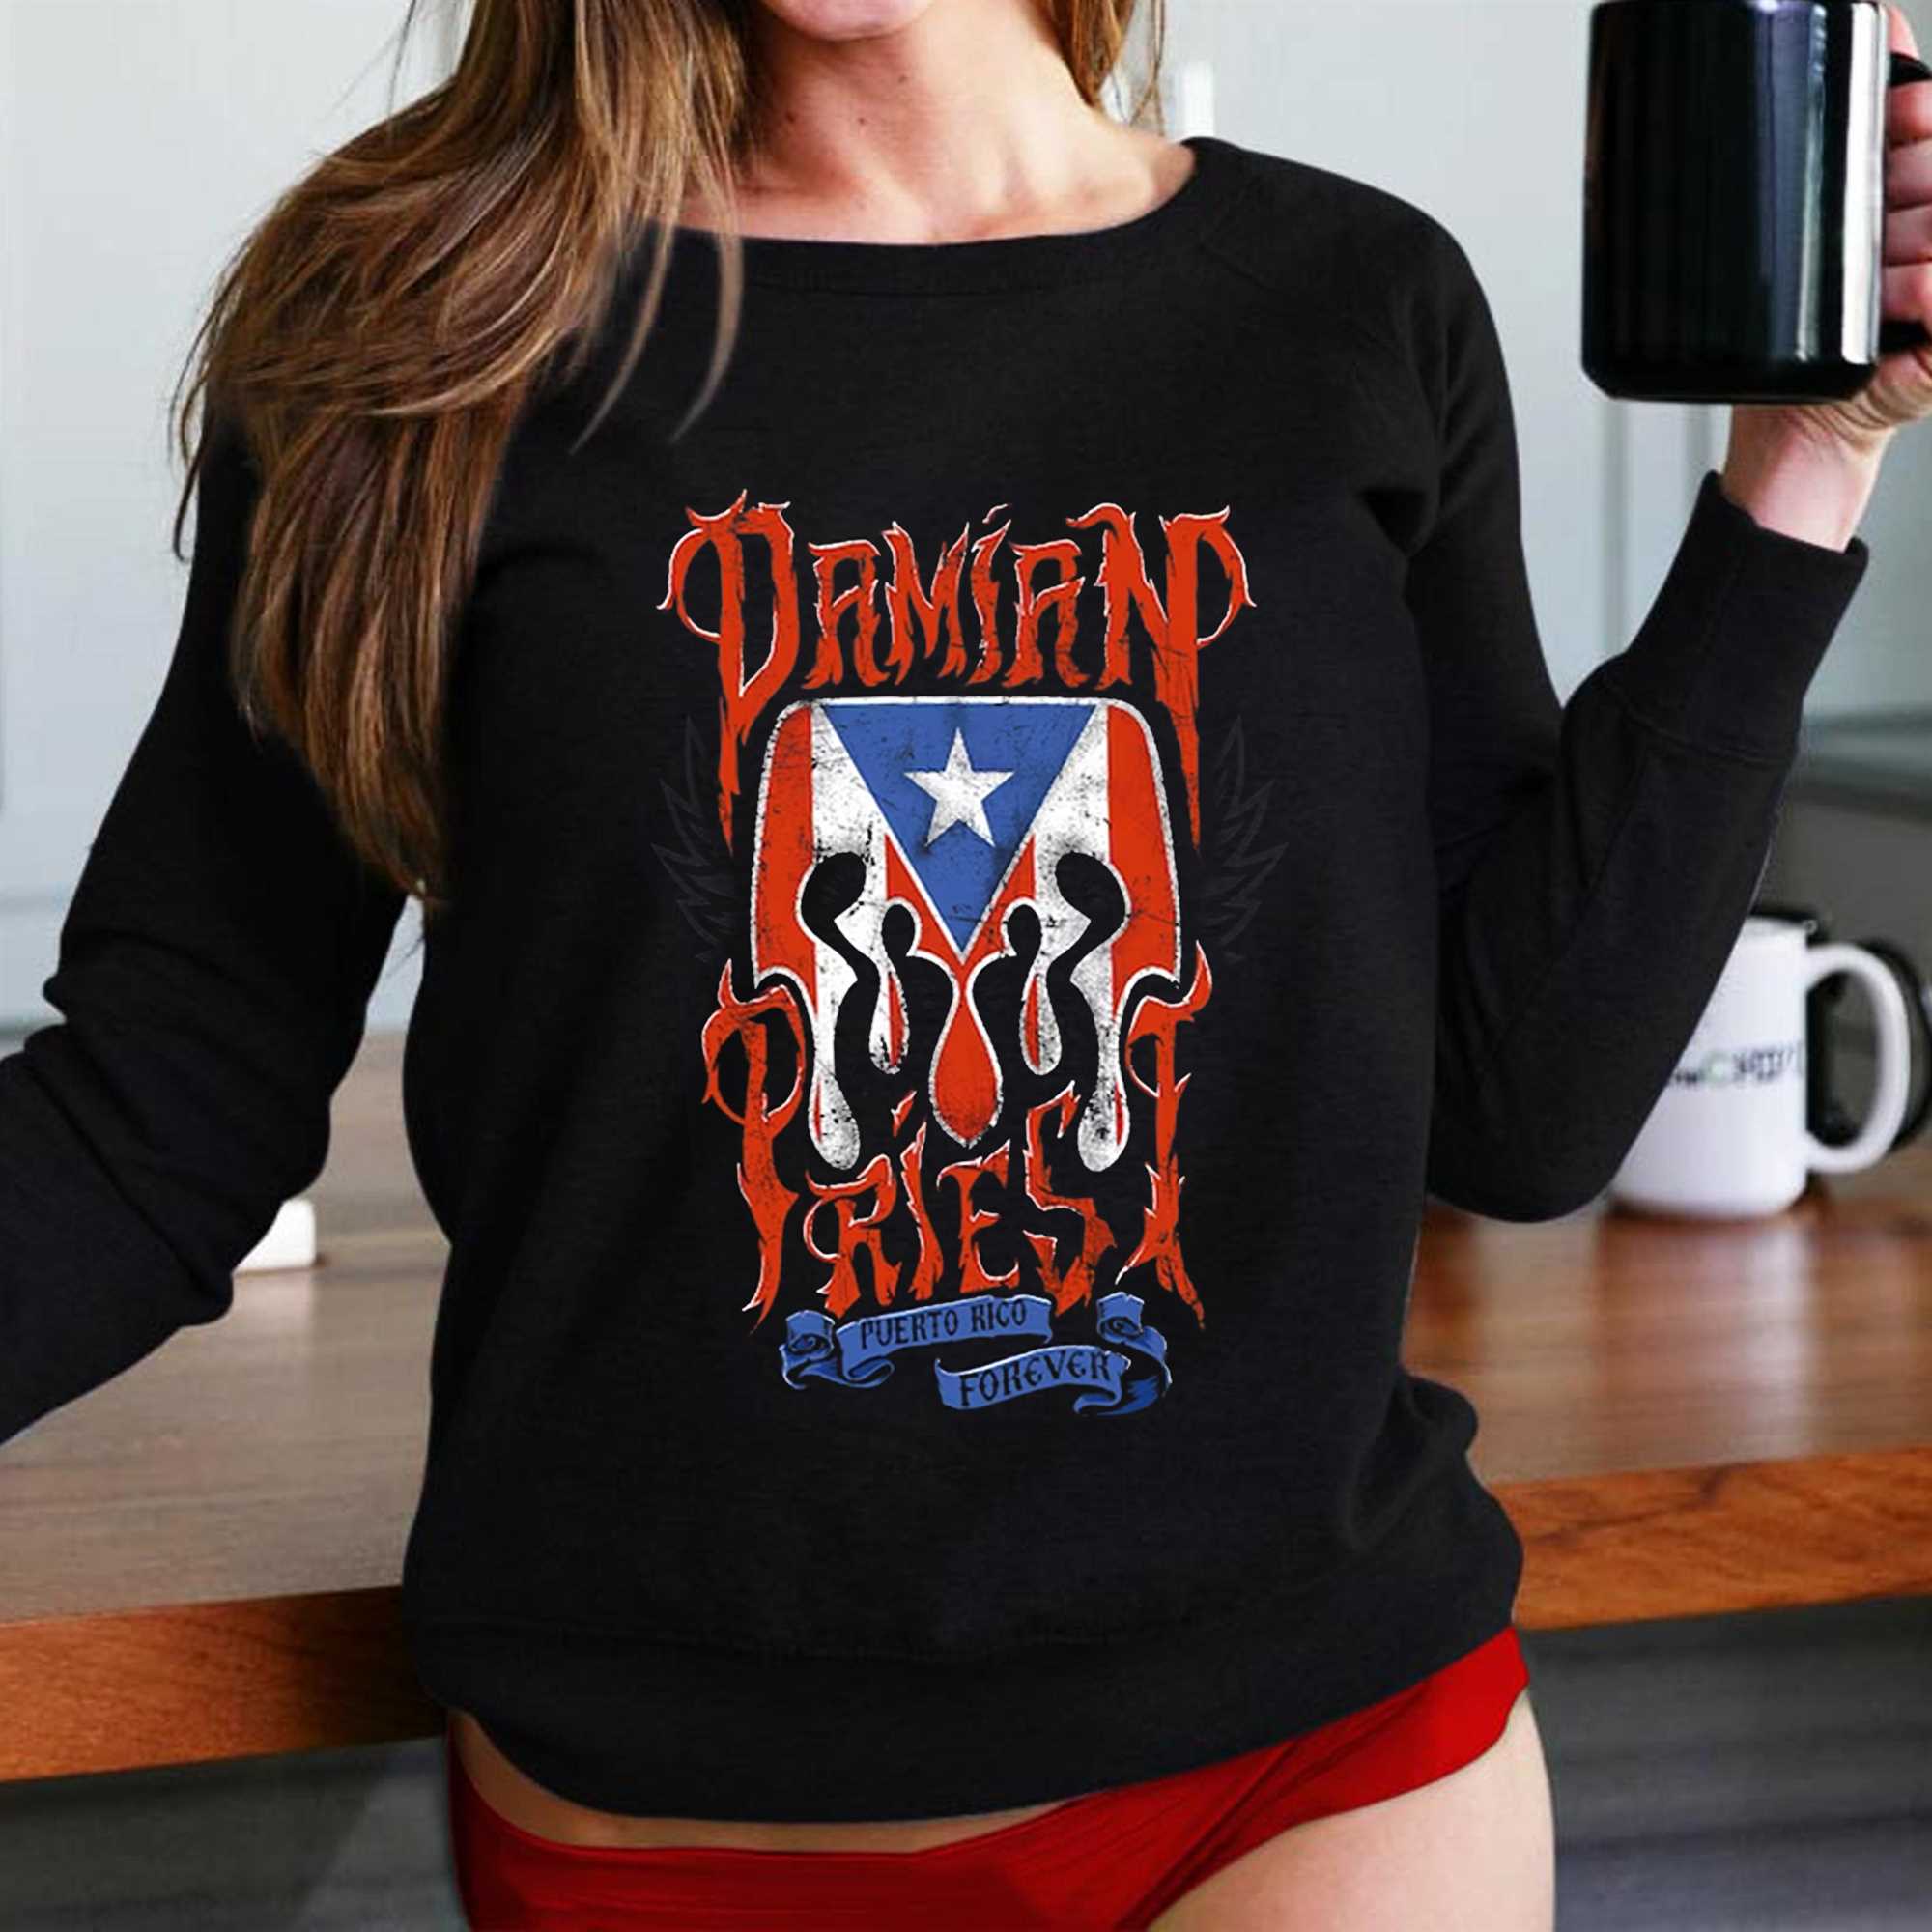 Design Damian priest puerto rico forever shirt, hoodie, sweater